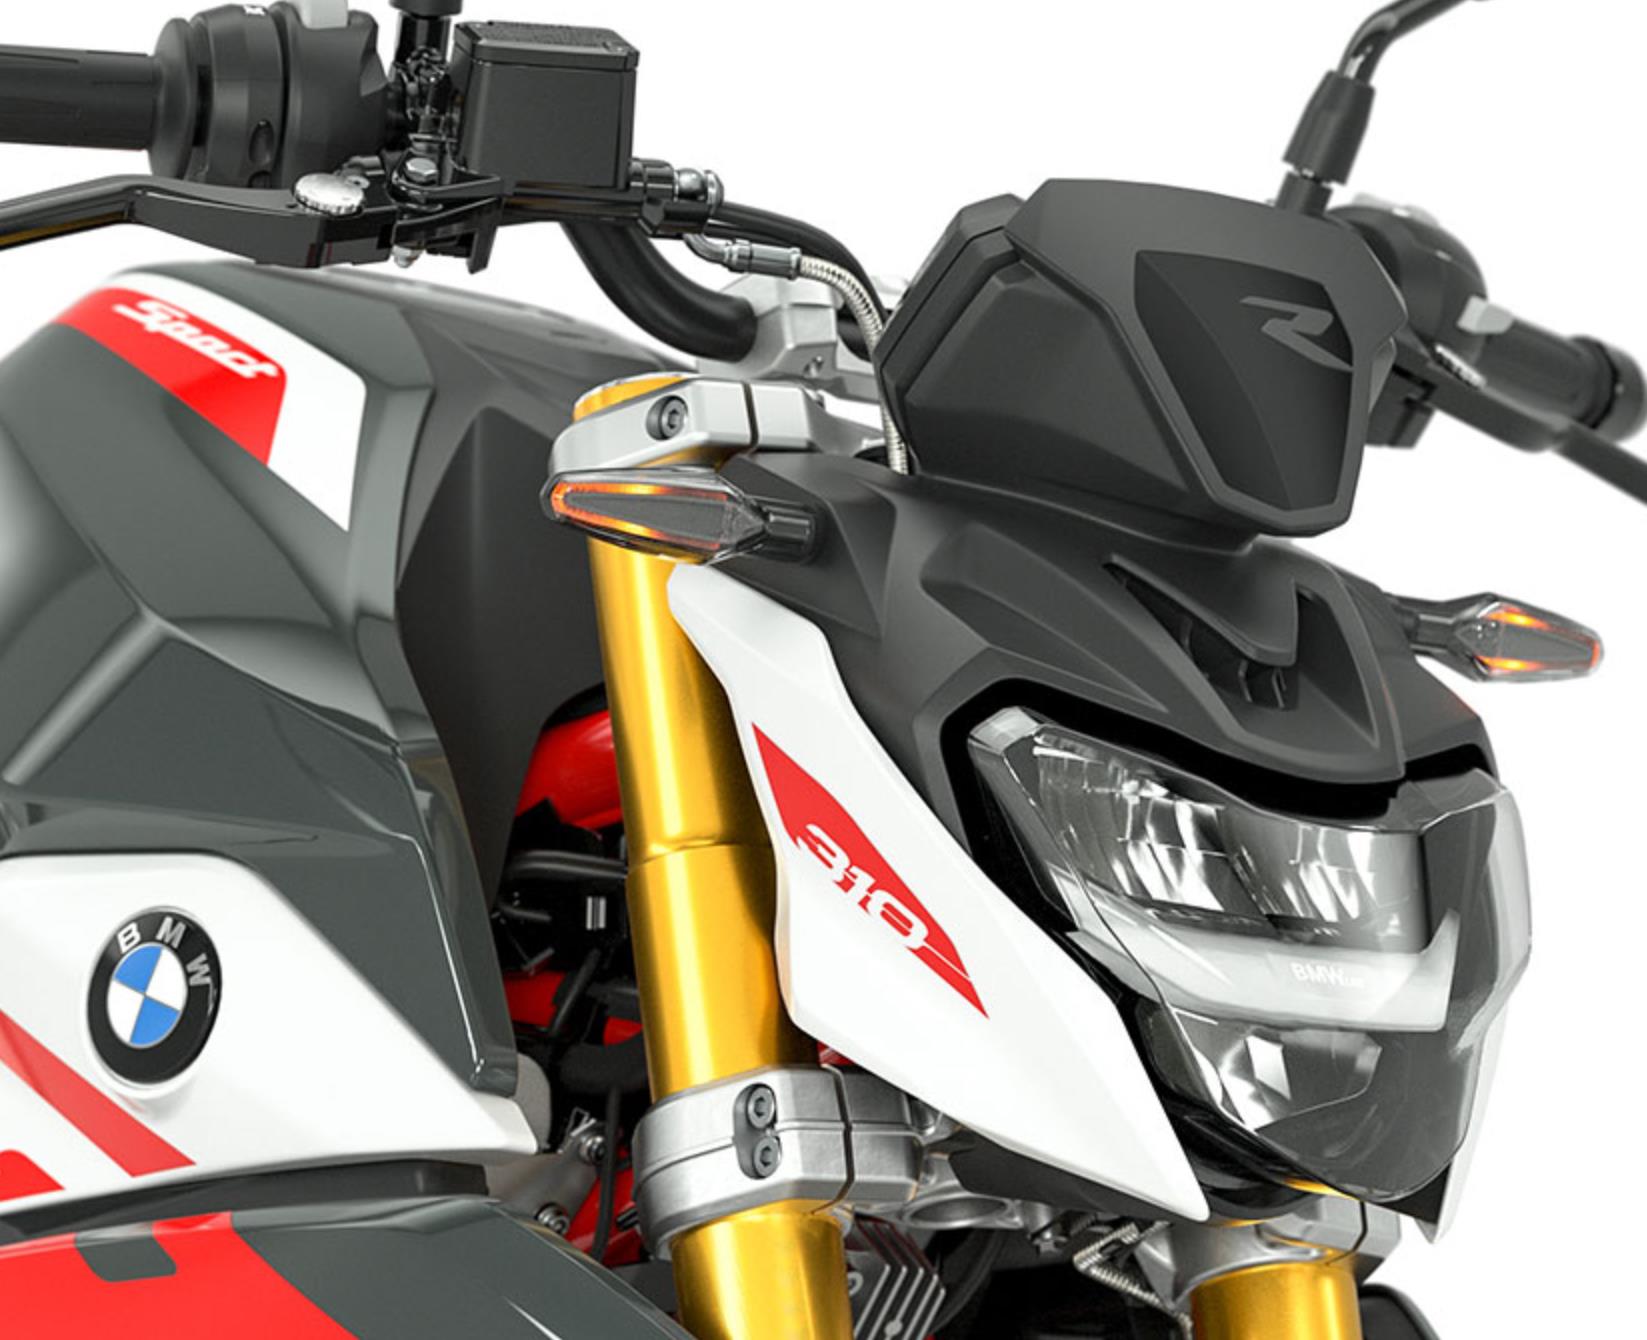 21 Bmw G310r Price Specs Top Speed Mileage In India